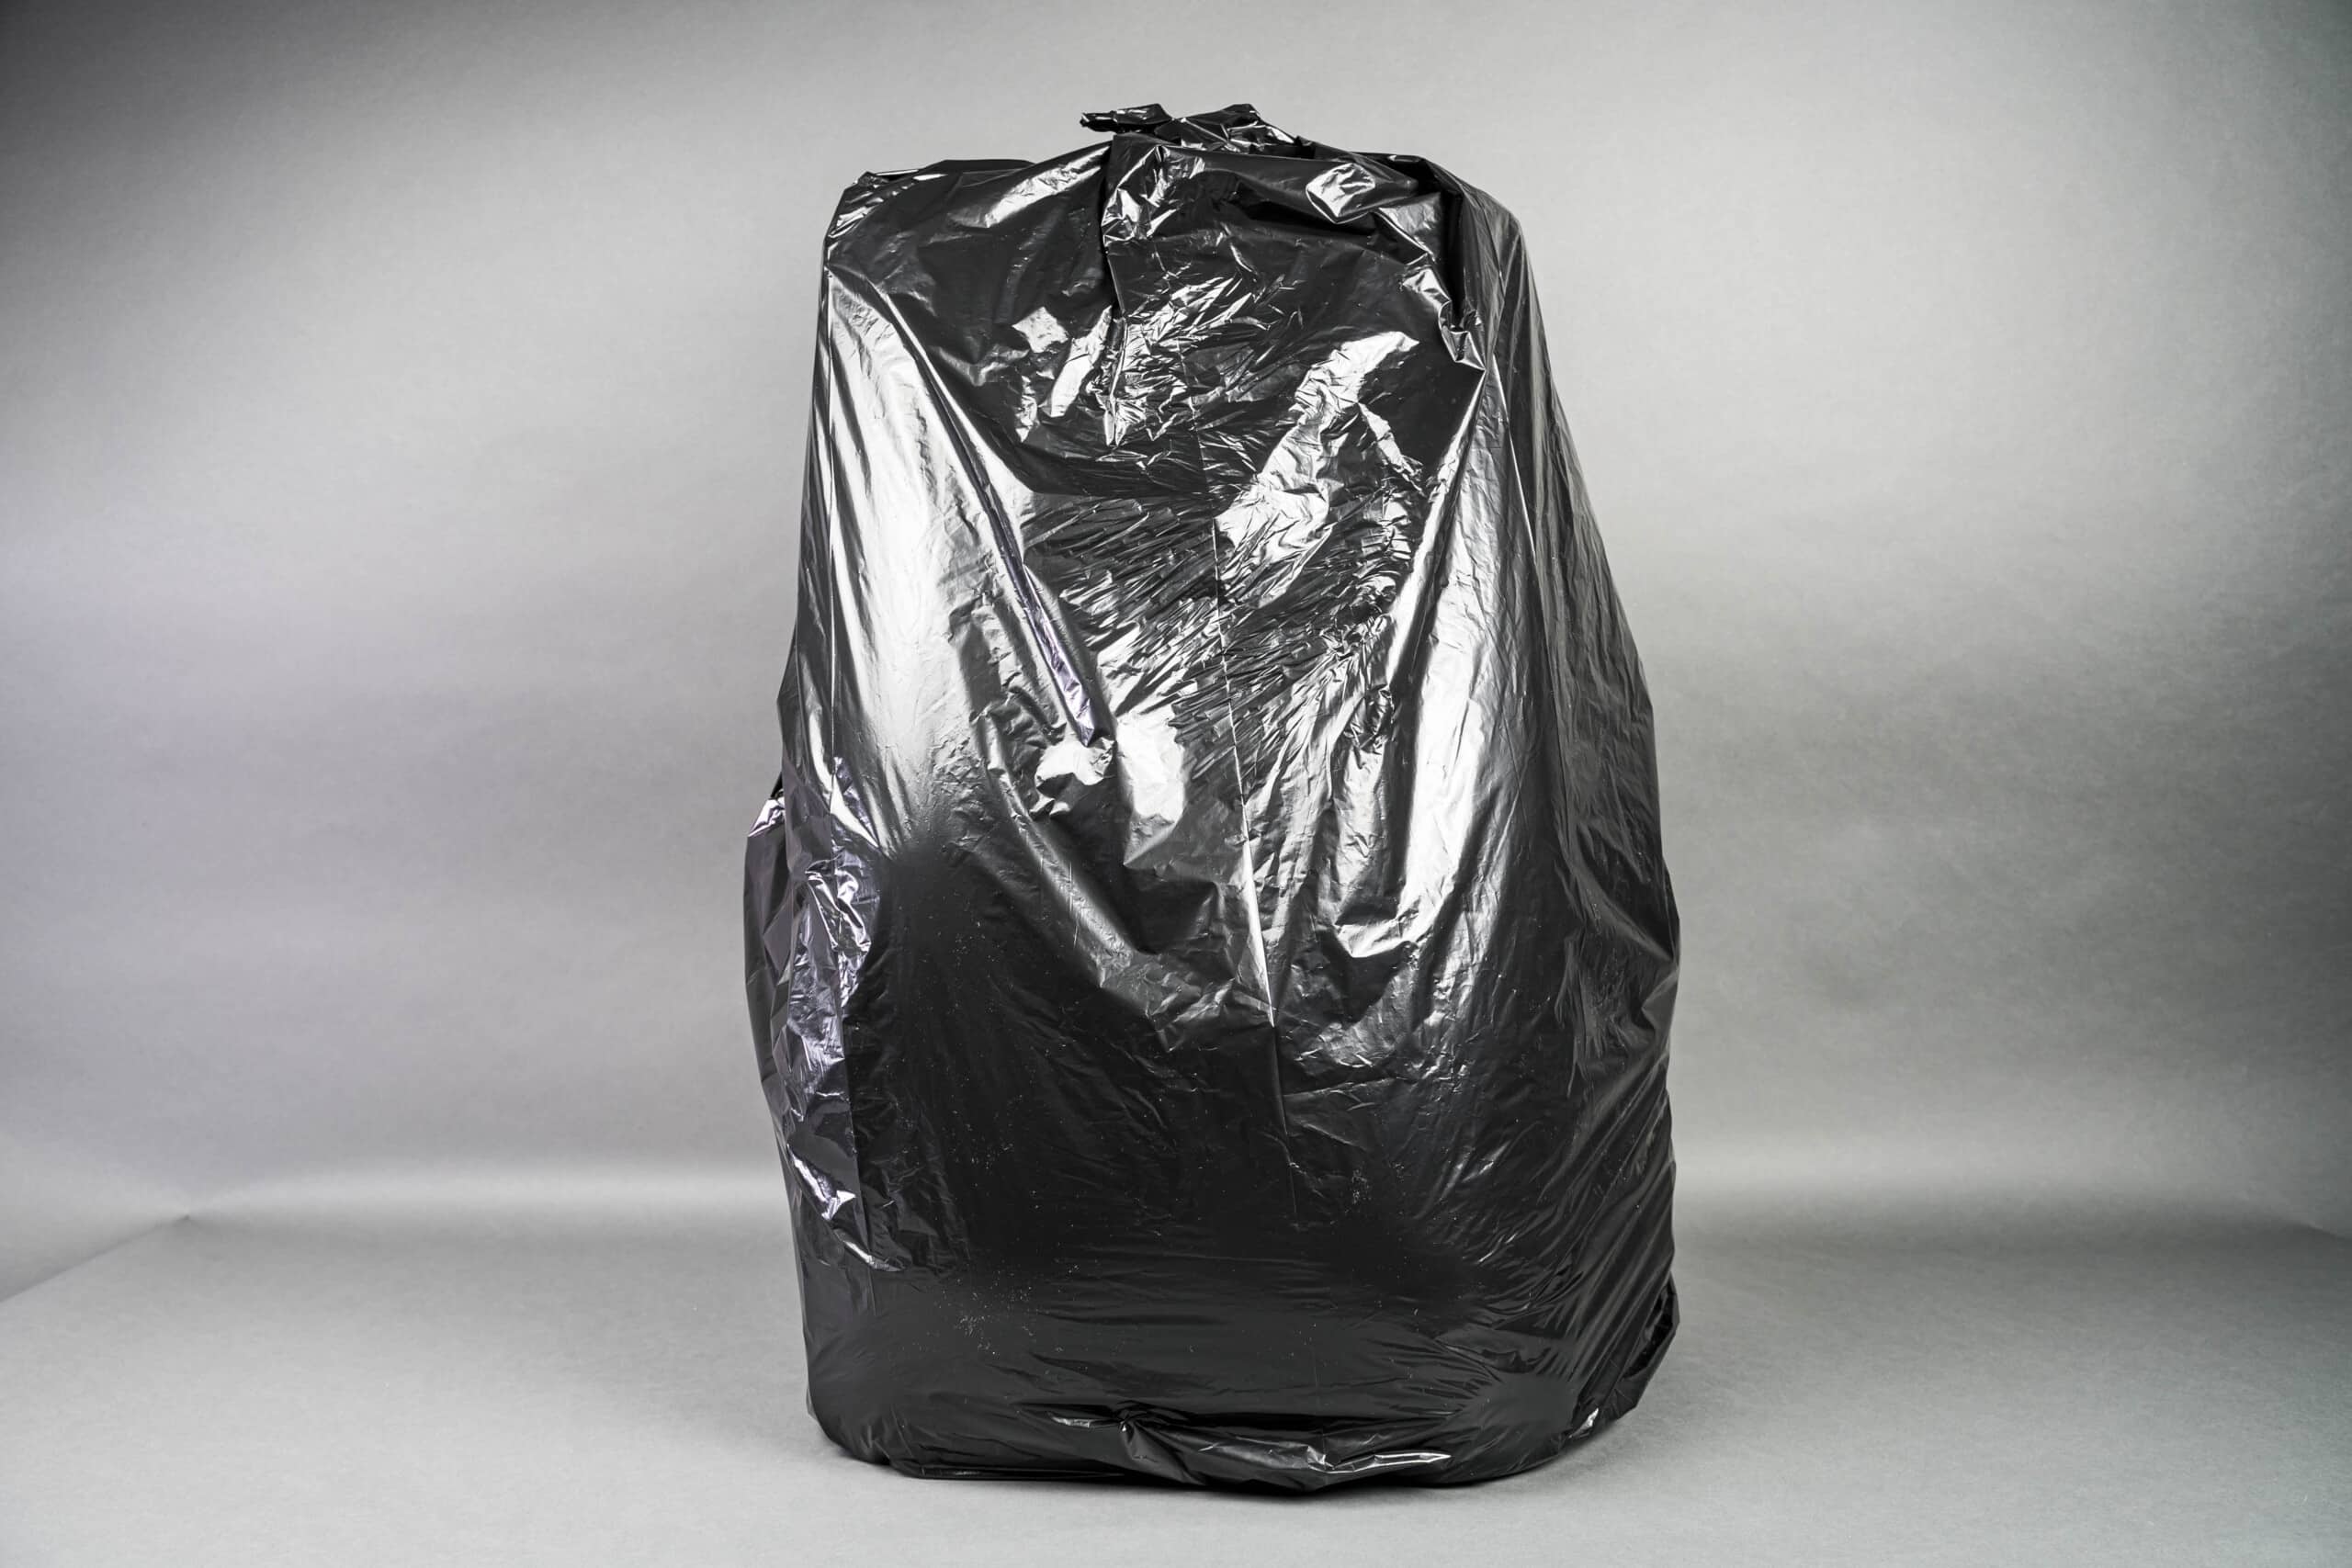 Recyclable shopping bags in bulk